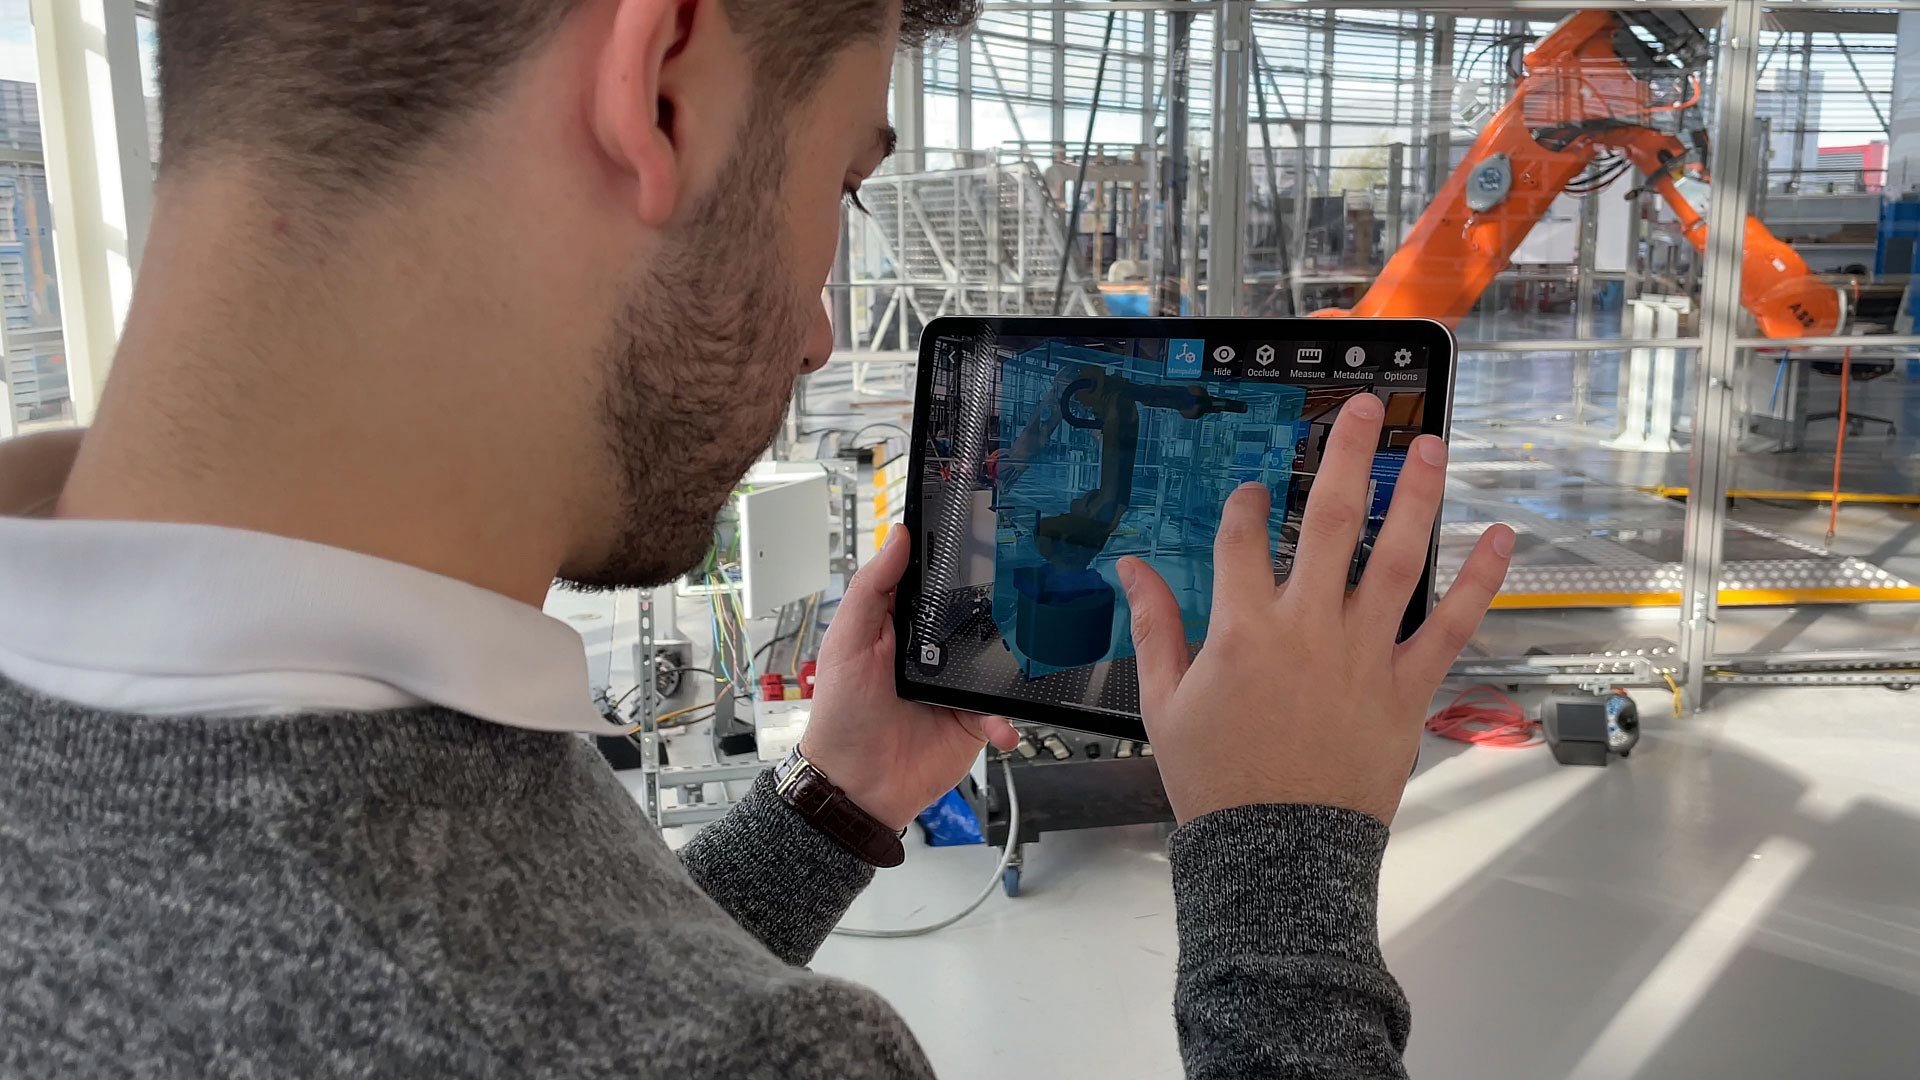 Engineer holding a tablet to visualize a robot arm in an empty cell.